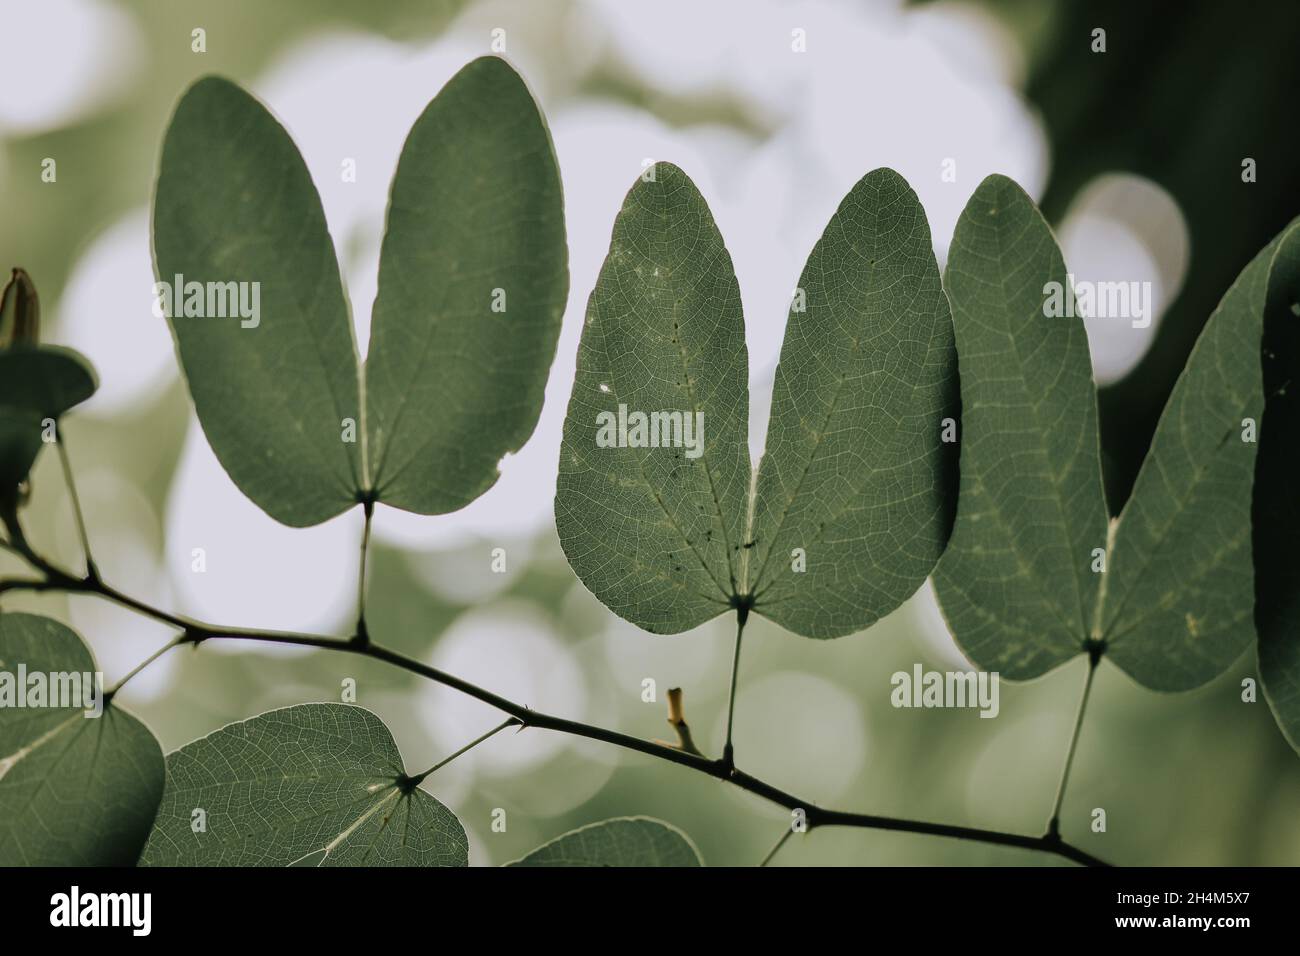 Closeup of Bauhinia monandra leaves growing in a field with a blurry background Stock Photo